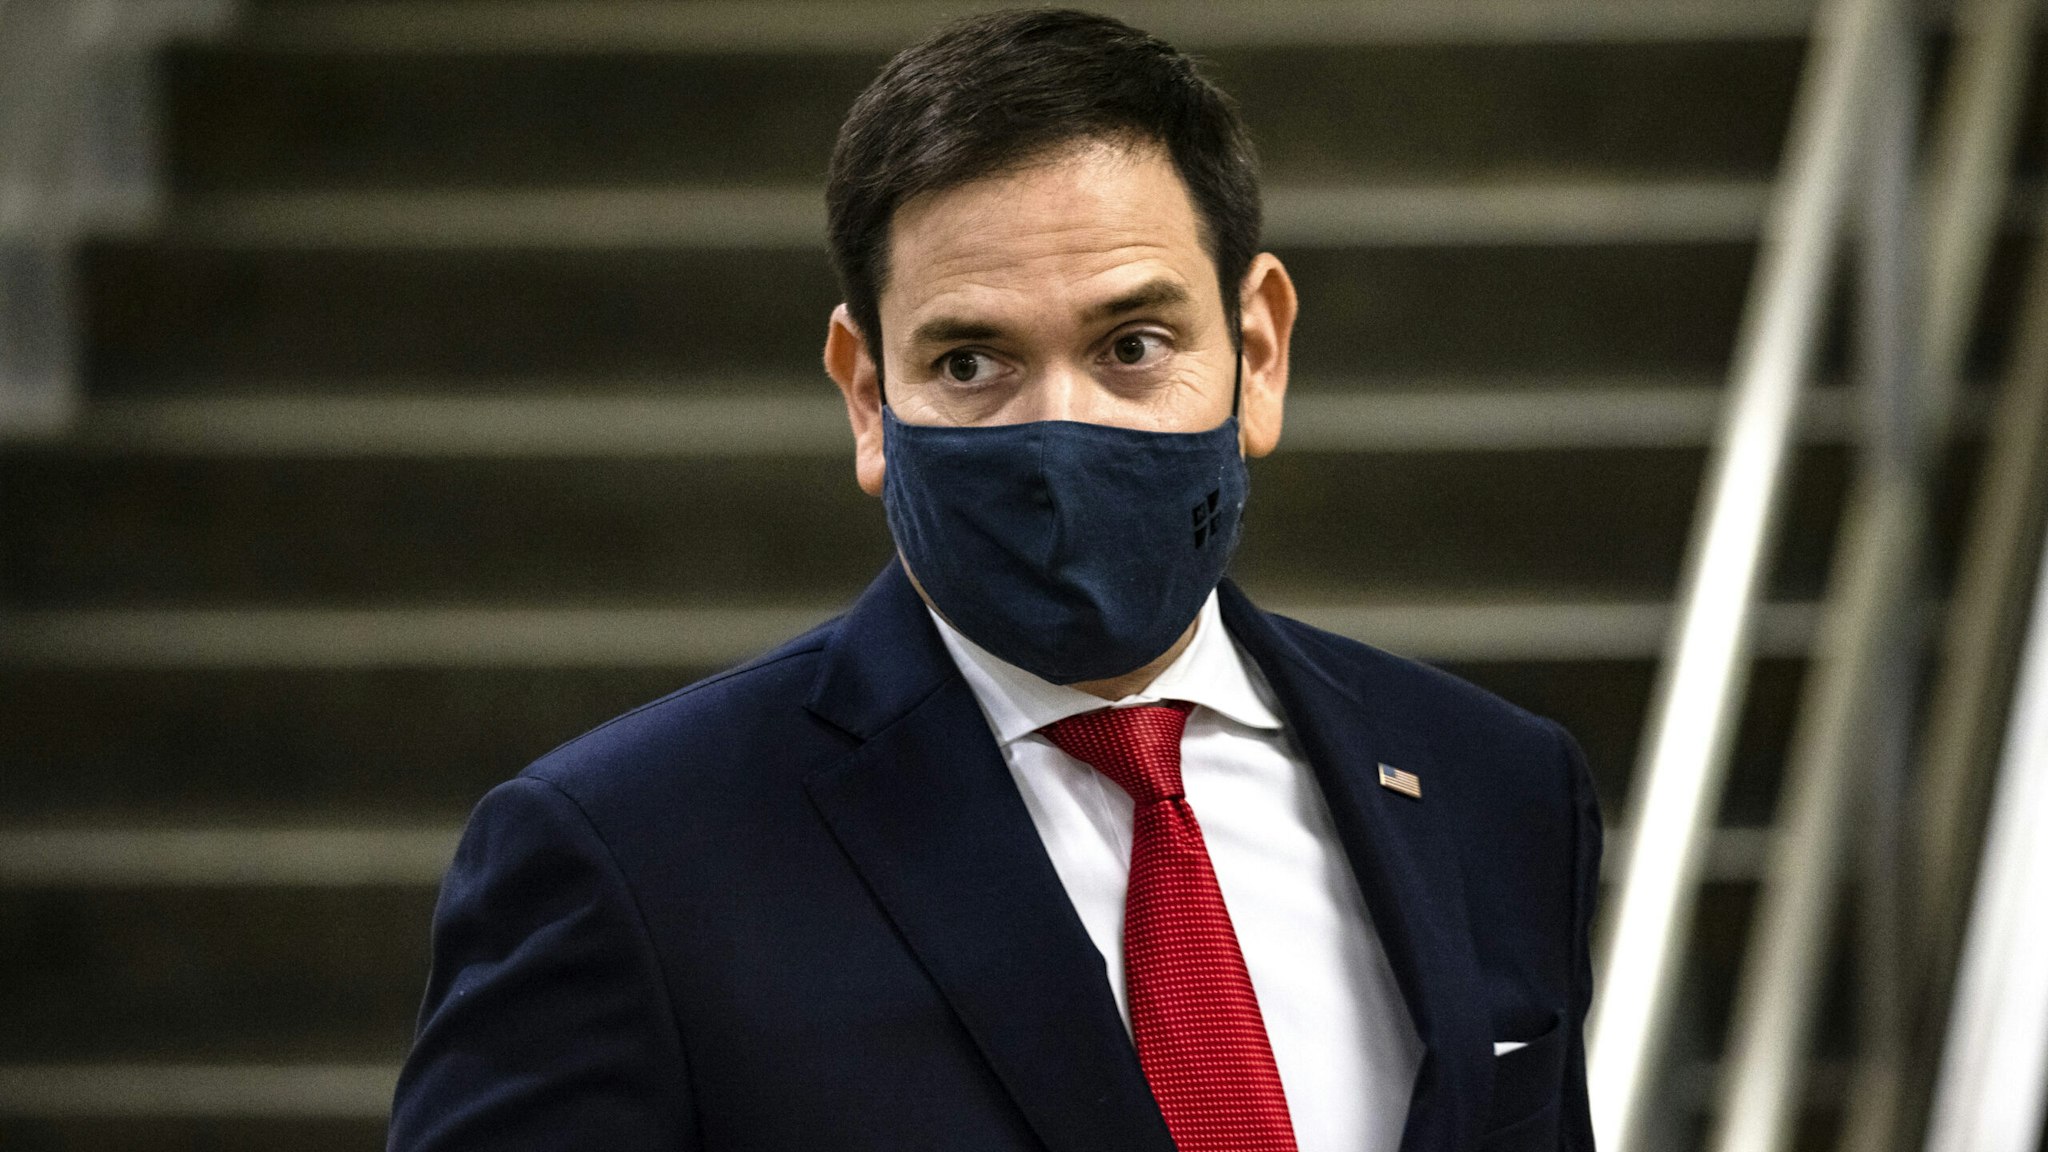 WASHINGTON, DC - NOVEMBER 12: Senator Marco Rubio (R-FL) walks through the Senate subway following a vote in the Senate at the U.S. Capitol on November 12, 2020 in Washington, DC. As President Trump continues to refuse to concede the Presidential Election to President-elect Joe Biden more Congressmen and women call for Biden to begin to receive classified national intelligence briefings from the Tump administration.